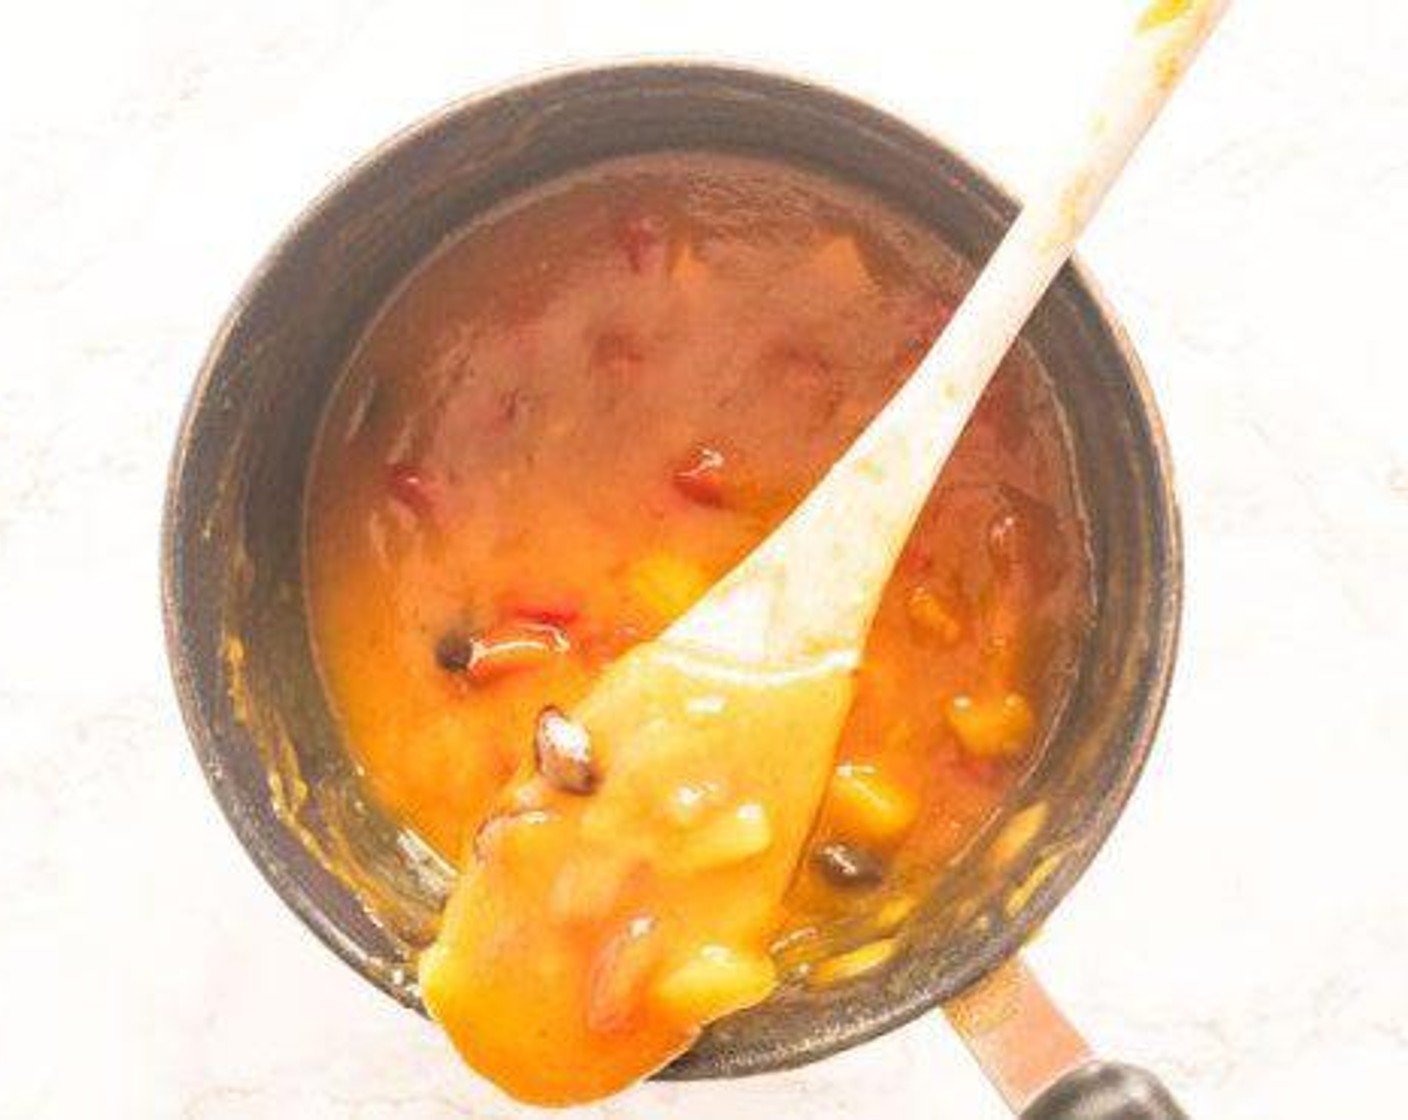 step 1 Make the chutney: Mix Mangoes (2) Brown Sugar (1/3 cup), Red Chili Pepper (1/4 cup), Raisins (2 Tbsp), Red Wine Vinegar (1 Tbsp), Ground Ginger (1 tsp), and Cayenne Pepper (1/4 tsp) together. Heat on stove or covered with paper towel in microwave for 1-2 minutes.